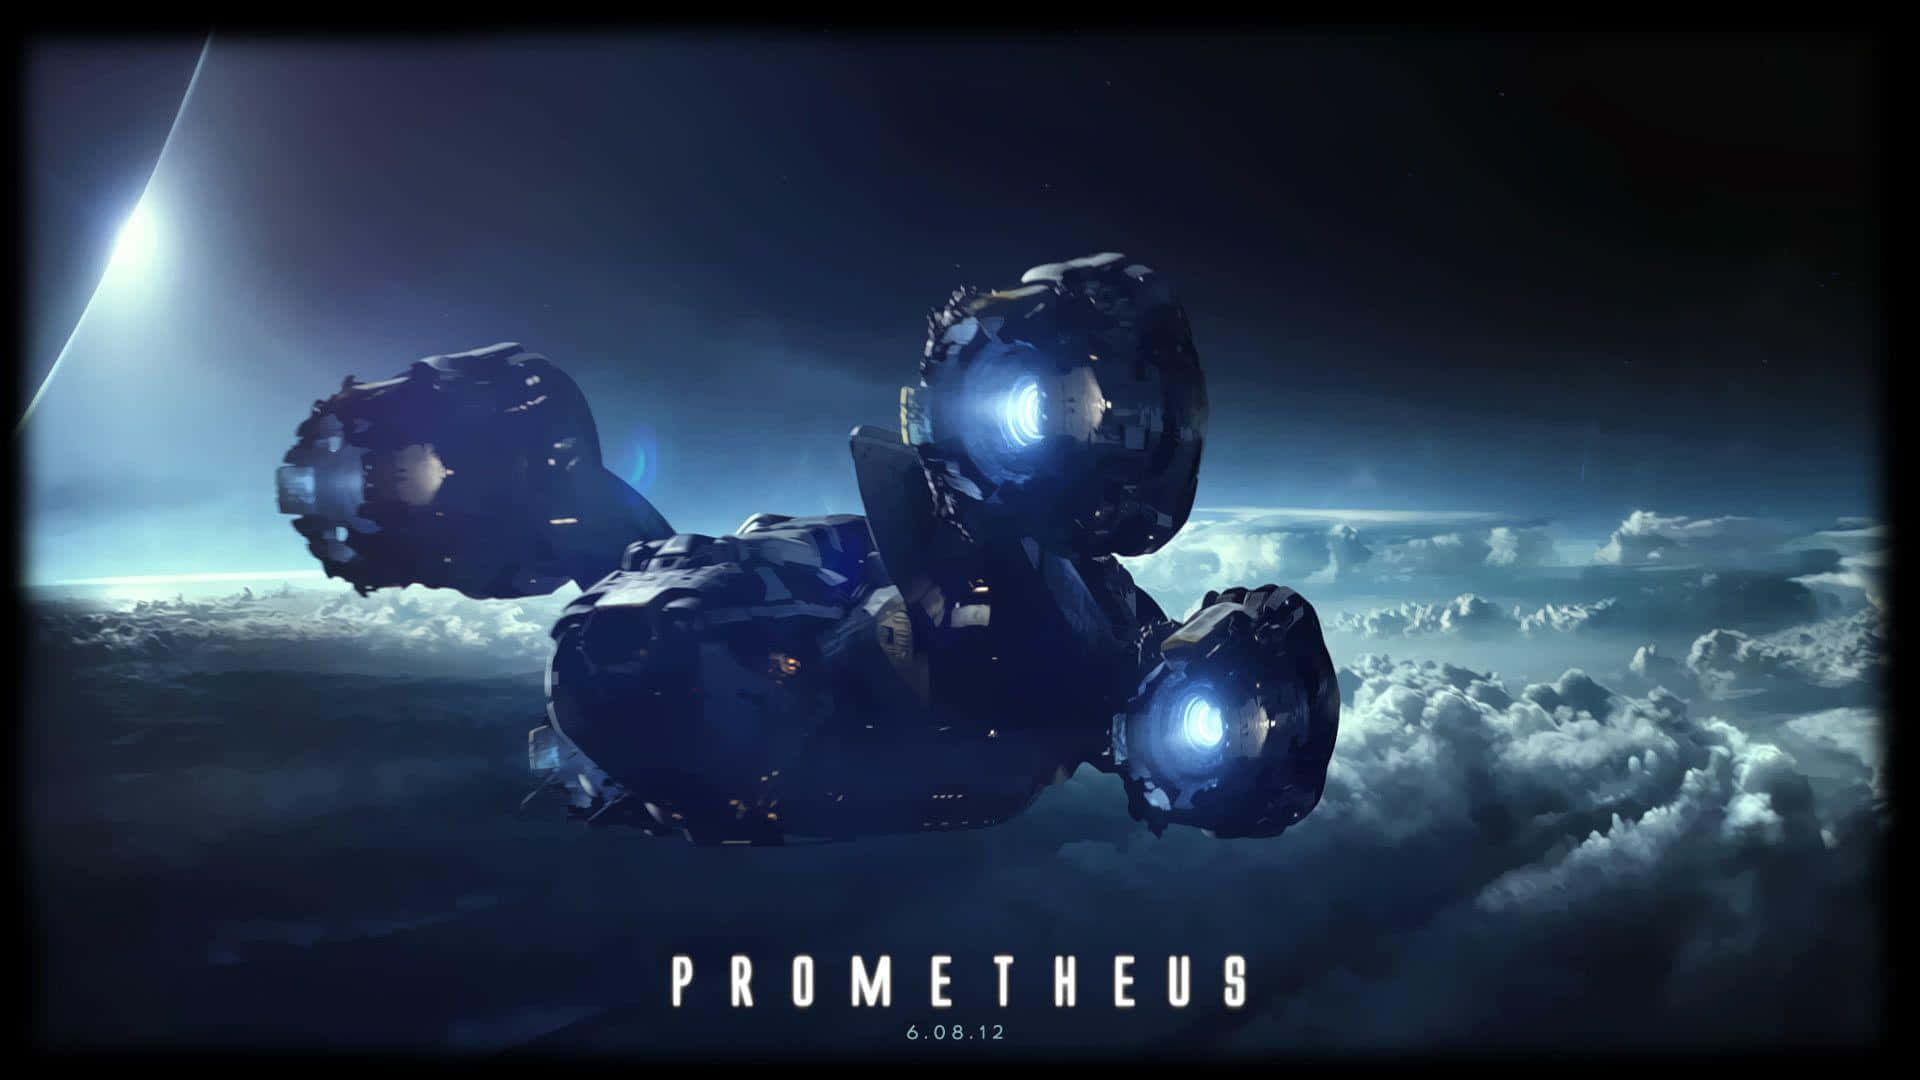 A Spaceship In The Sky With The Words Prometheus